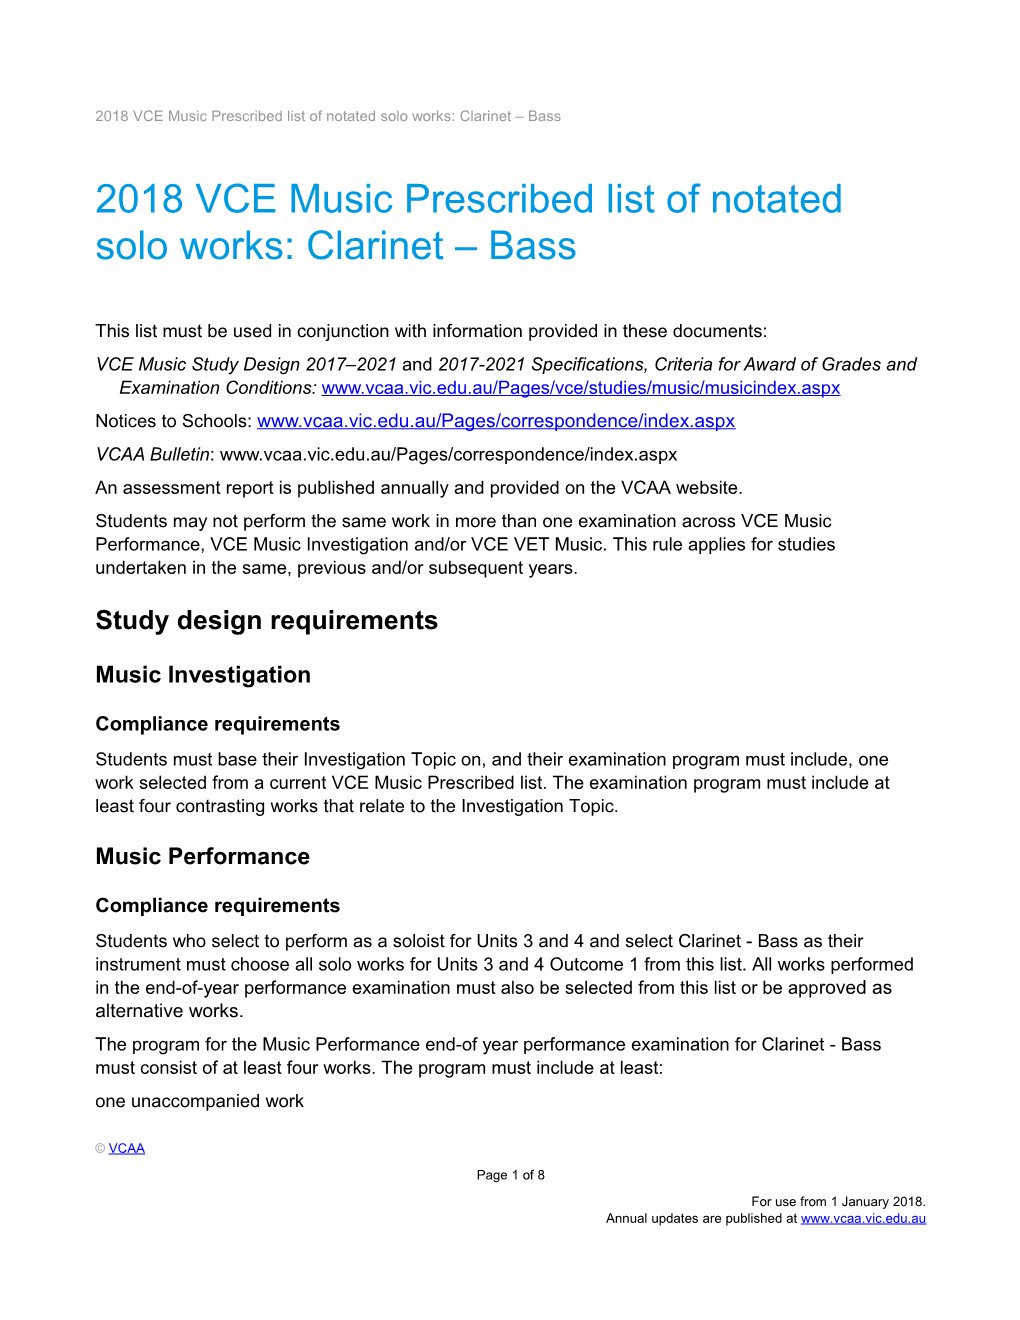 2018 VCE Music Prescribed List of Notated Solo Works: Clarinet Bass